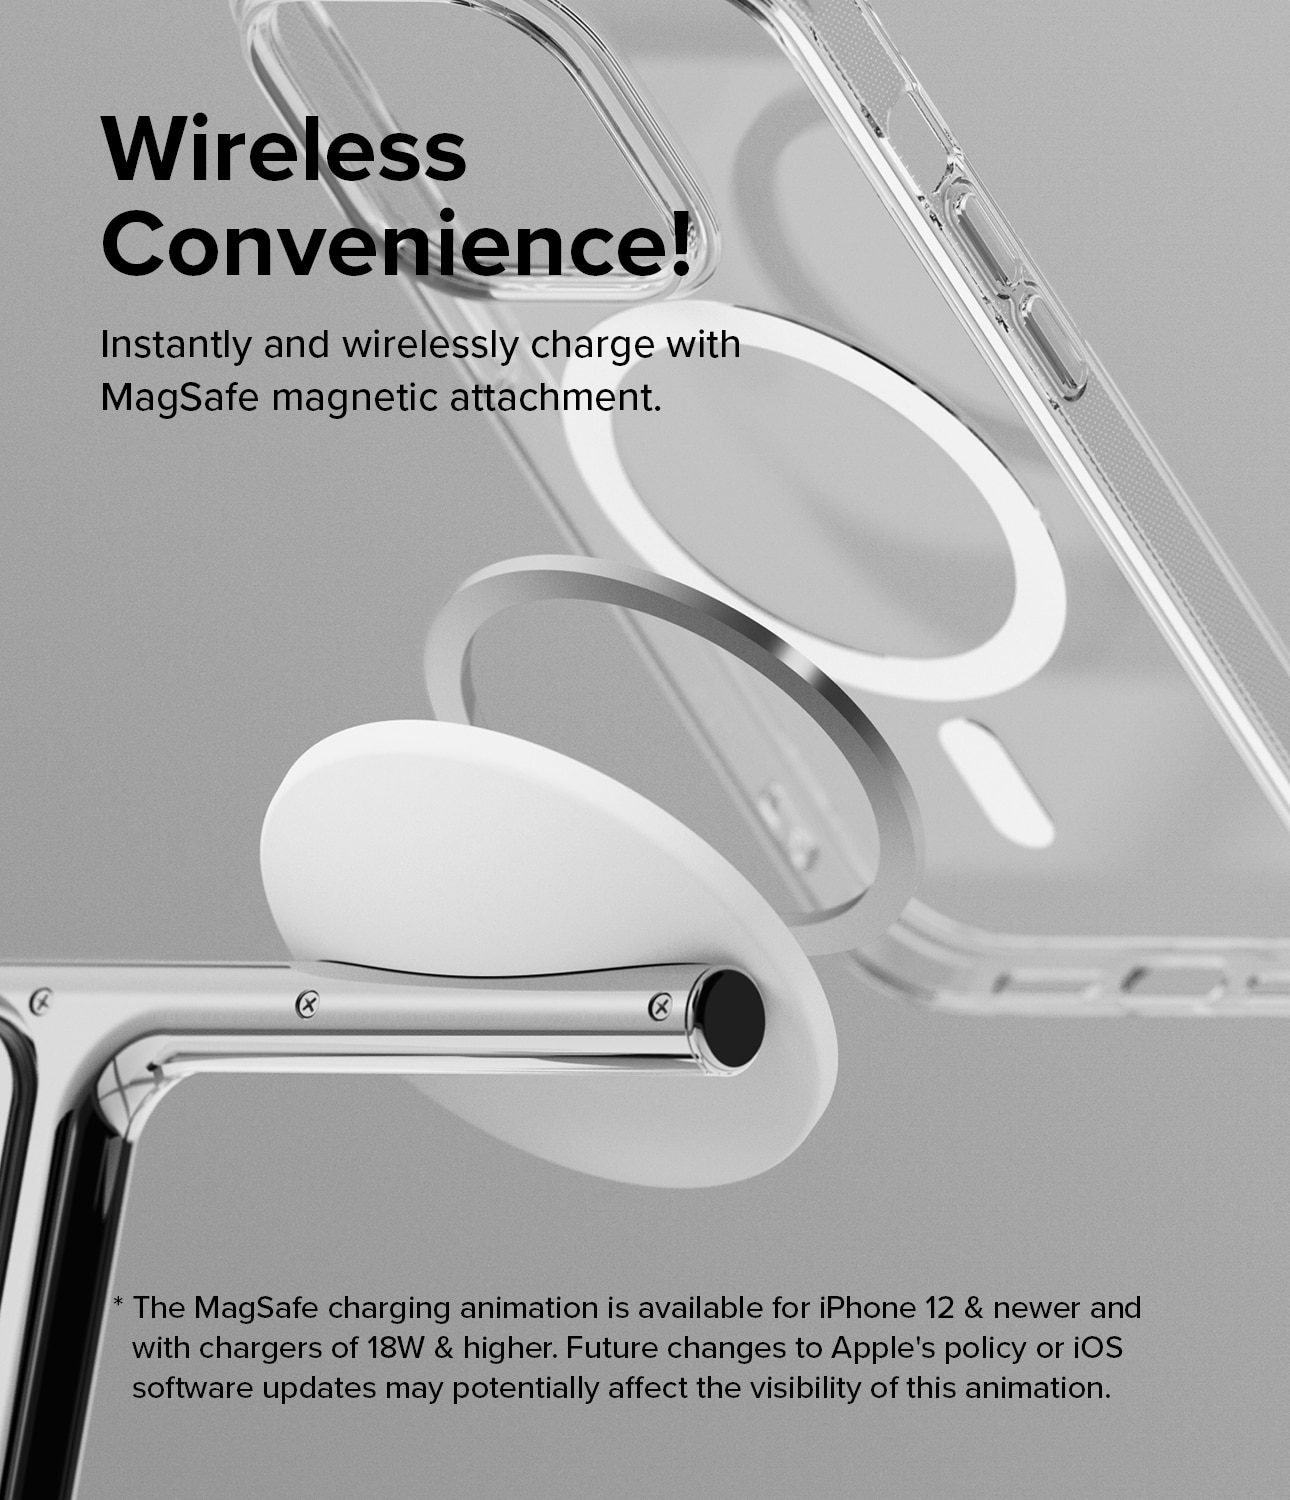 3-in-1 Wireless Charger Stand hvit